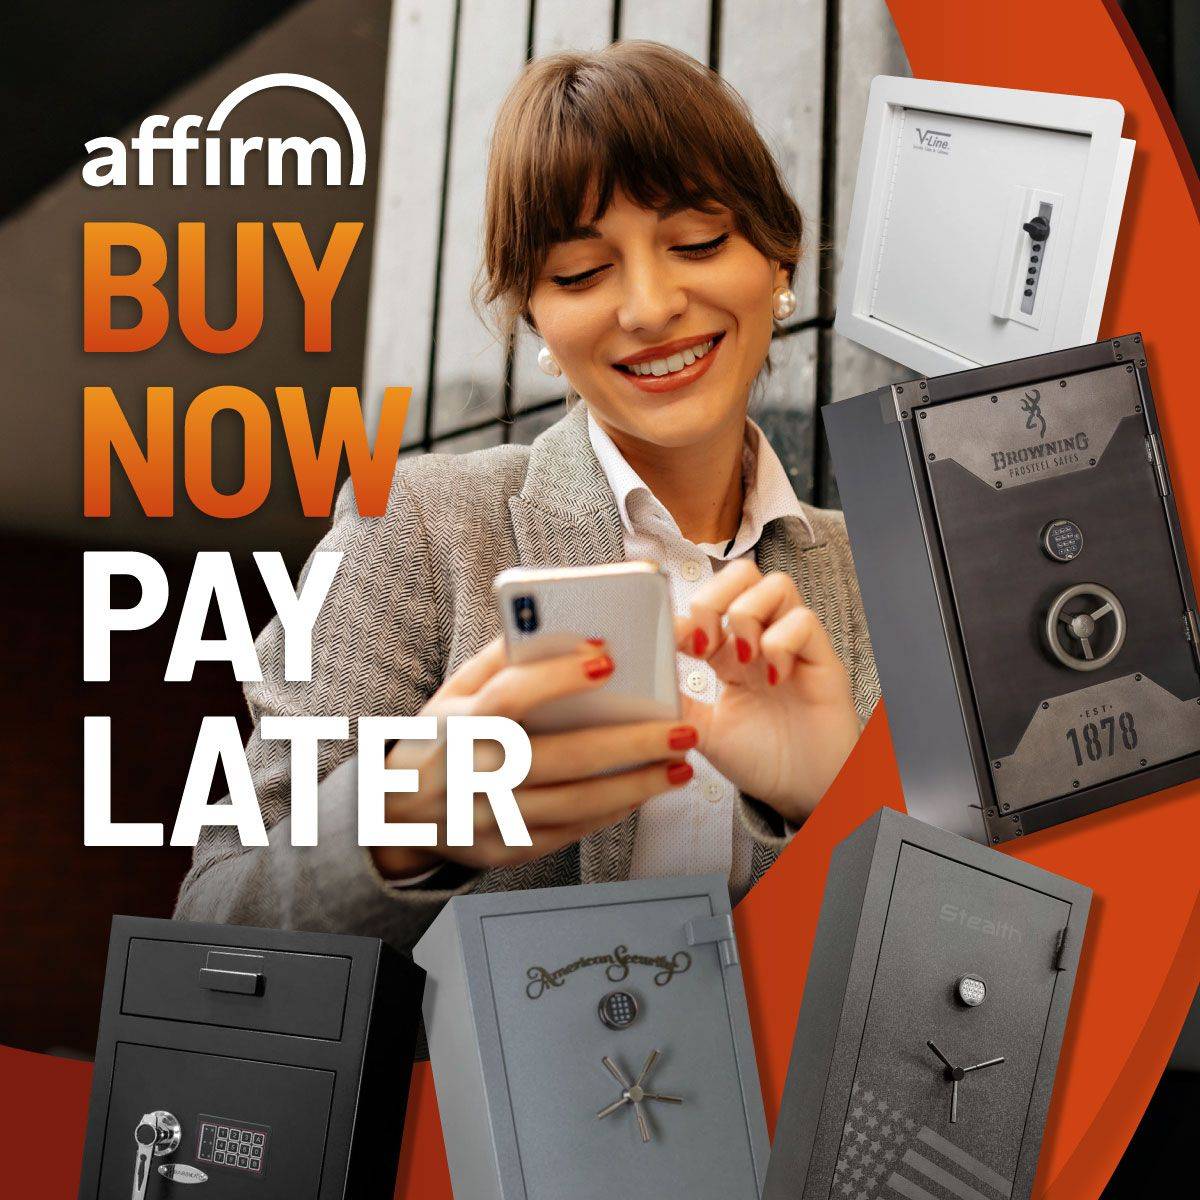 Affirm Buy Now Pay Later